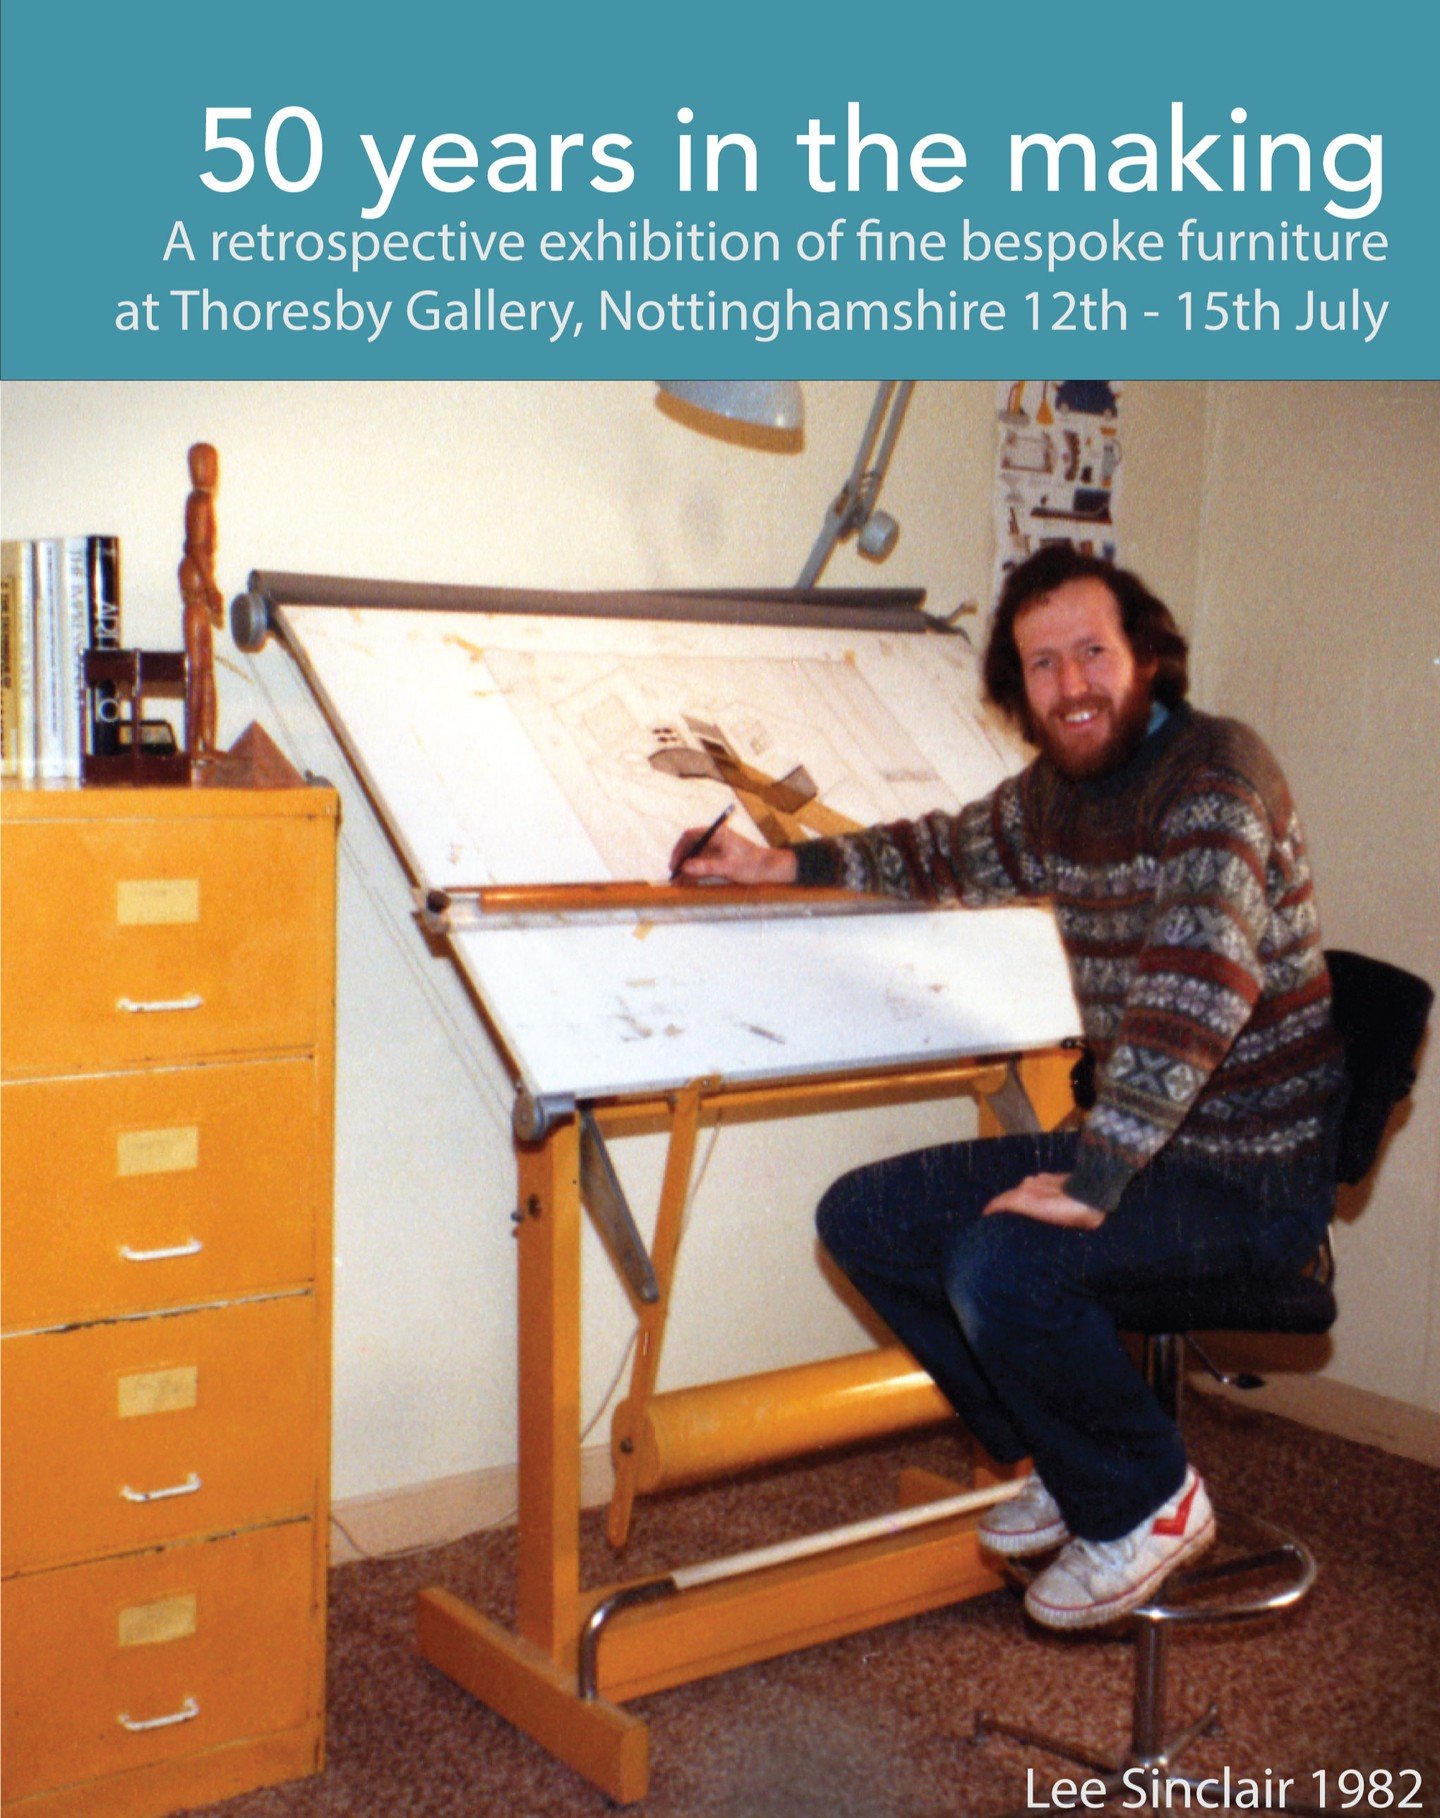 We are celebrating our 50 year anniversary by hosting a solo exhibition at Thoresby Gallery. Join us as we look back on half a decade of designs and celebrate the charm of images such as this one of Lee Sinclair in 1982! 
#50yearsinthemaking #furnitu